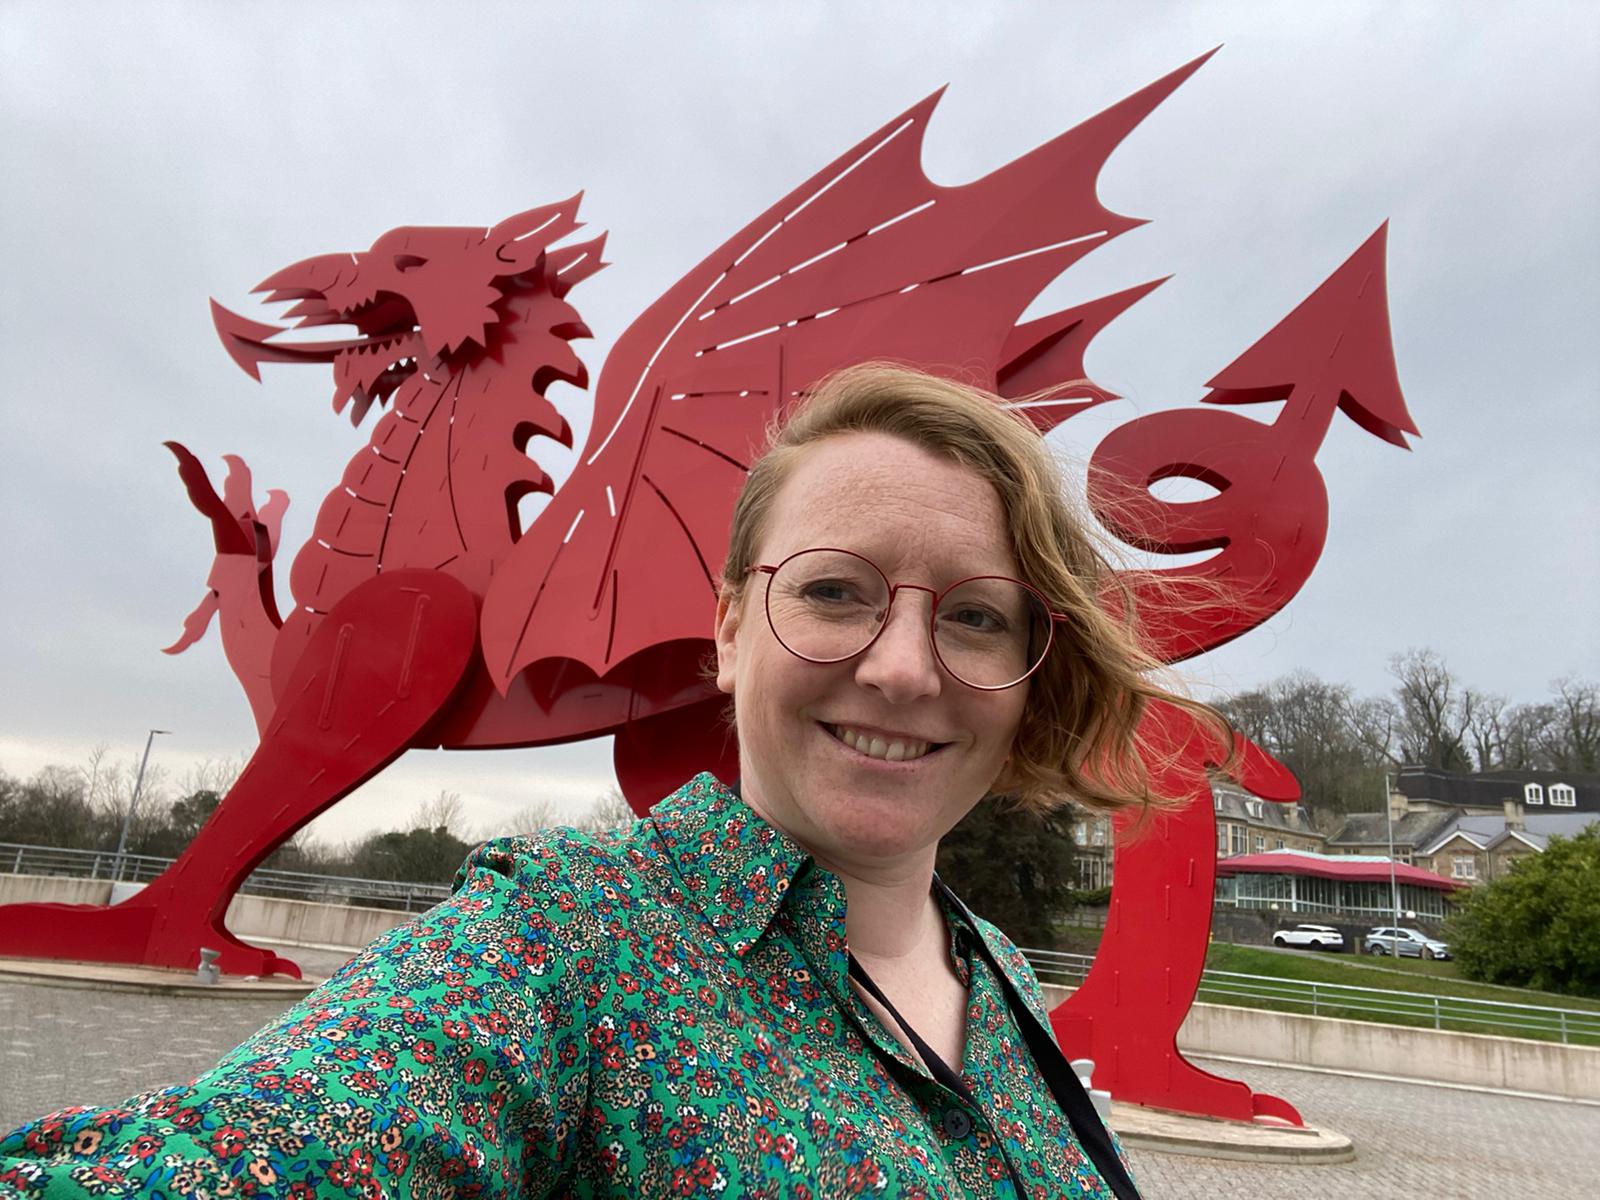 Grasshopper Director, Clare Jones, takes a selfie in front of a large, red Welsh Dragon sculpture